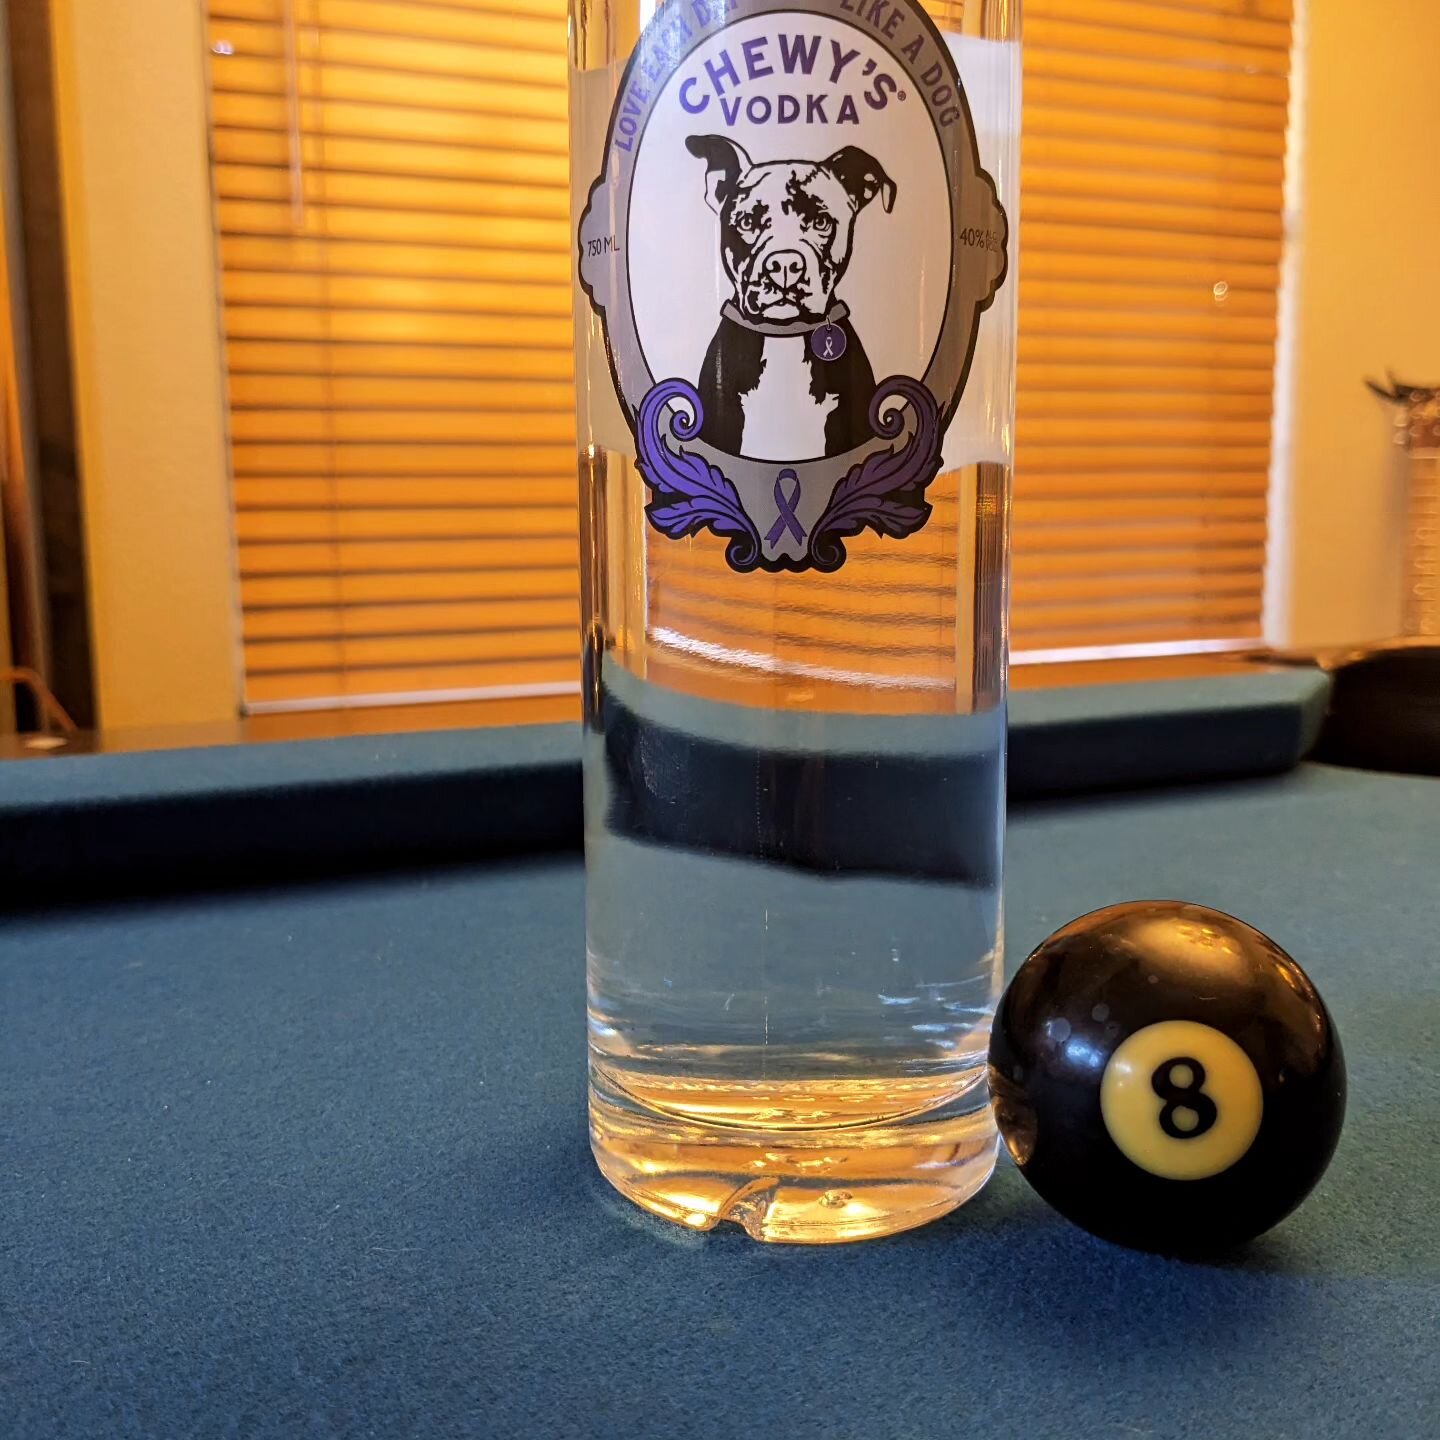 Be sure to buy and share Chewys vodka.com  and merchandise available on (forwhiskeylovers.com)